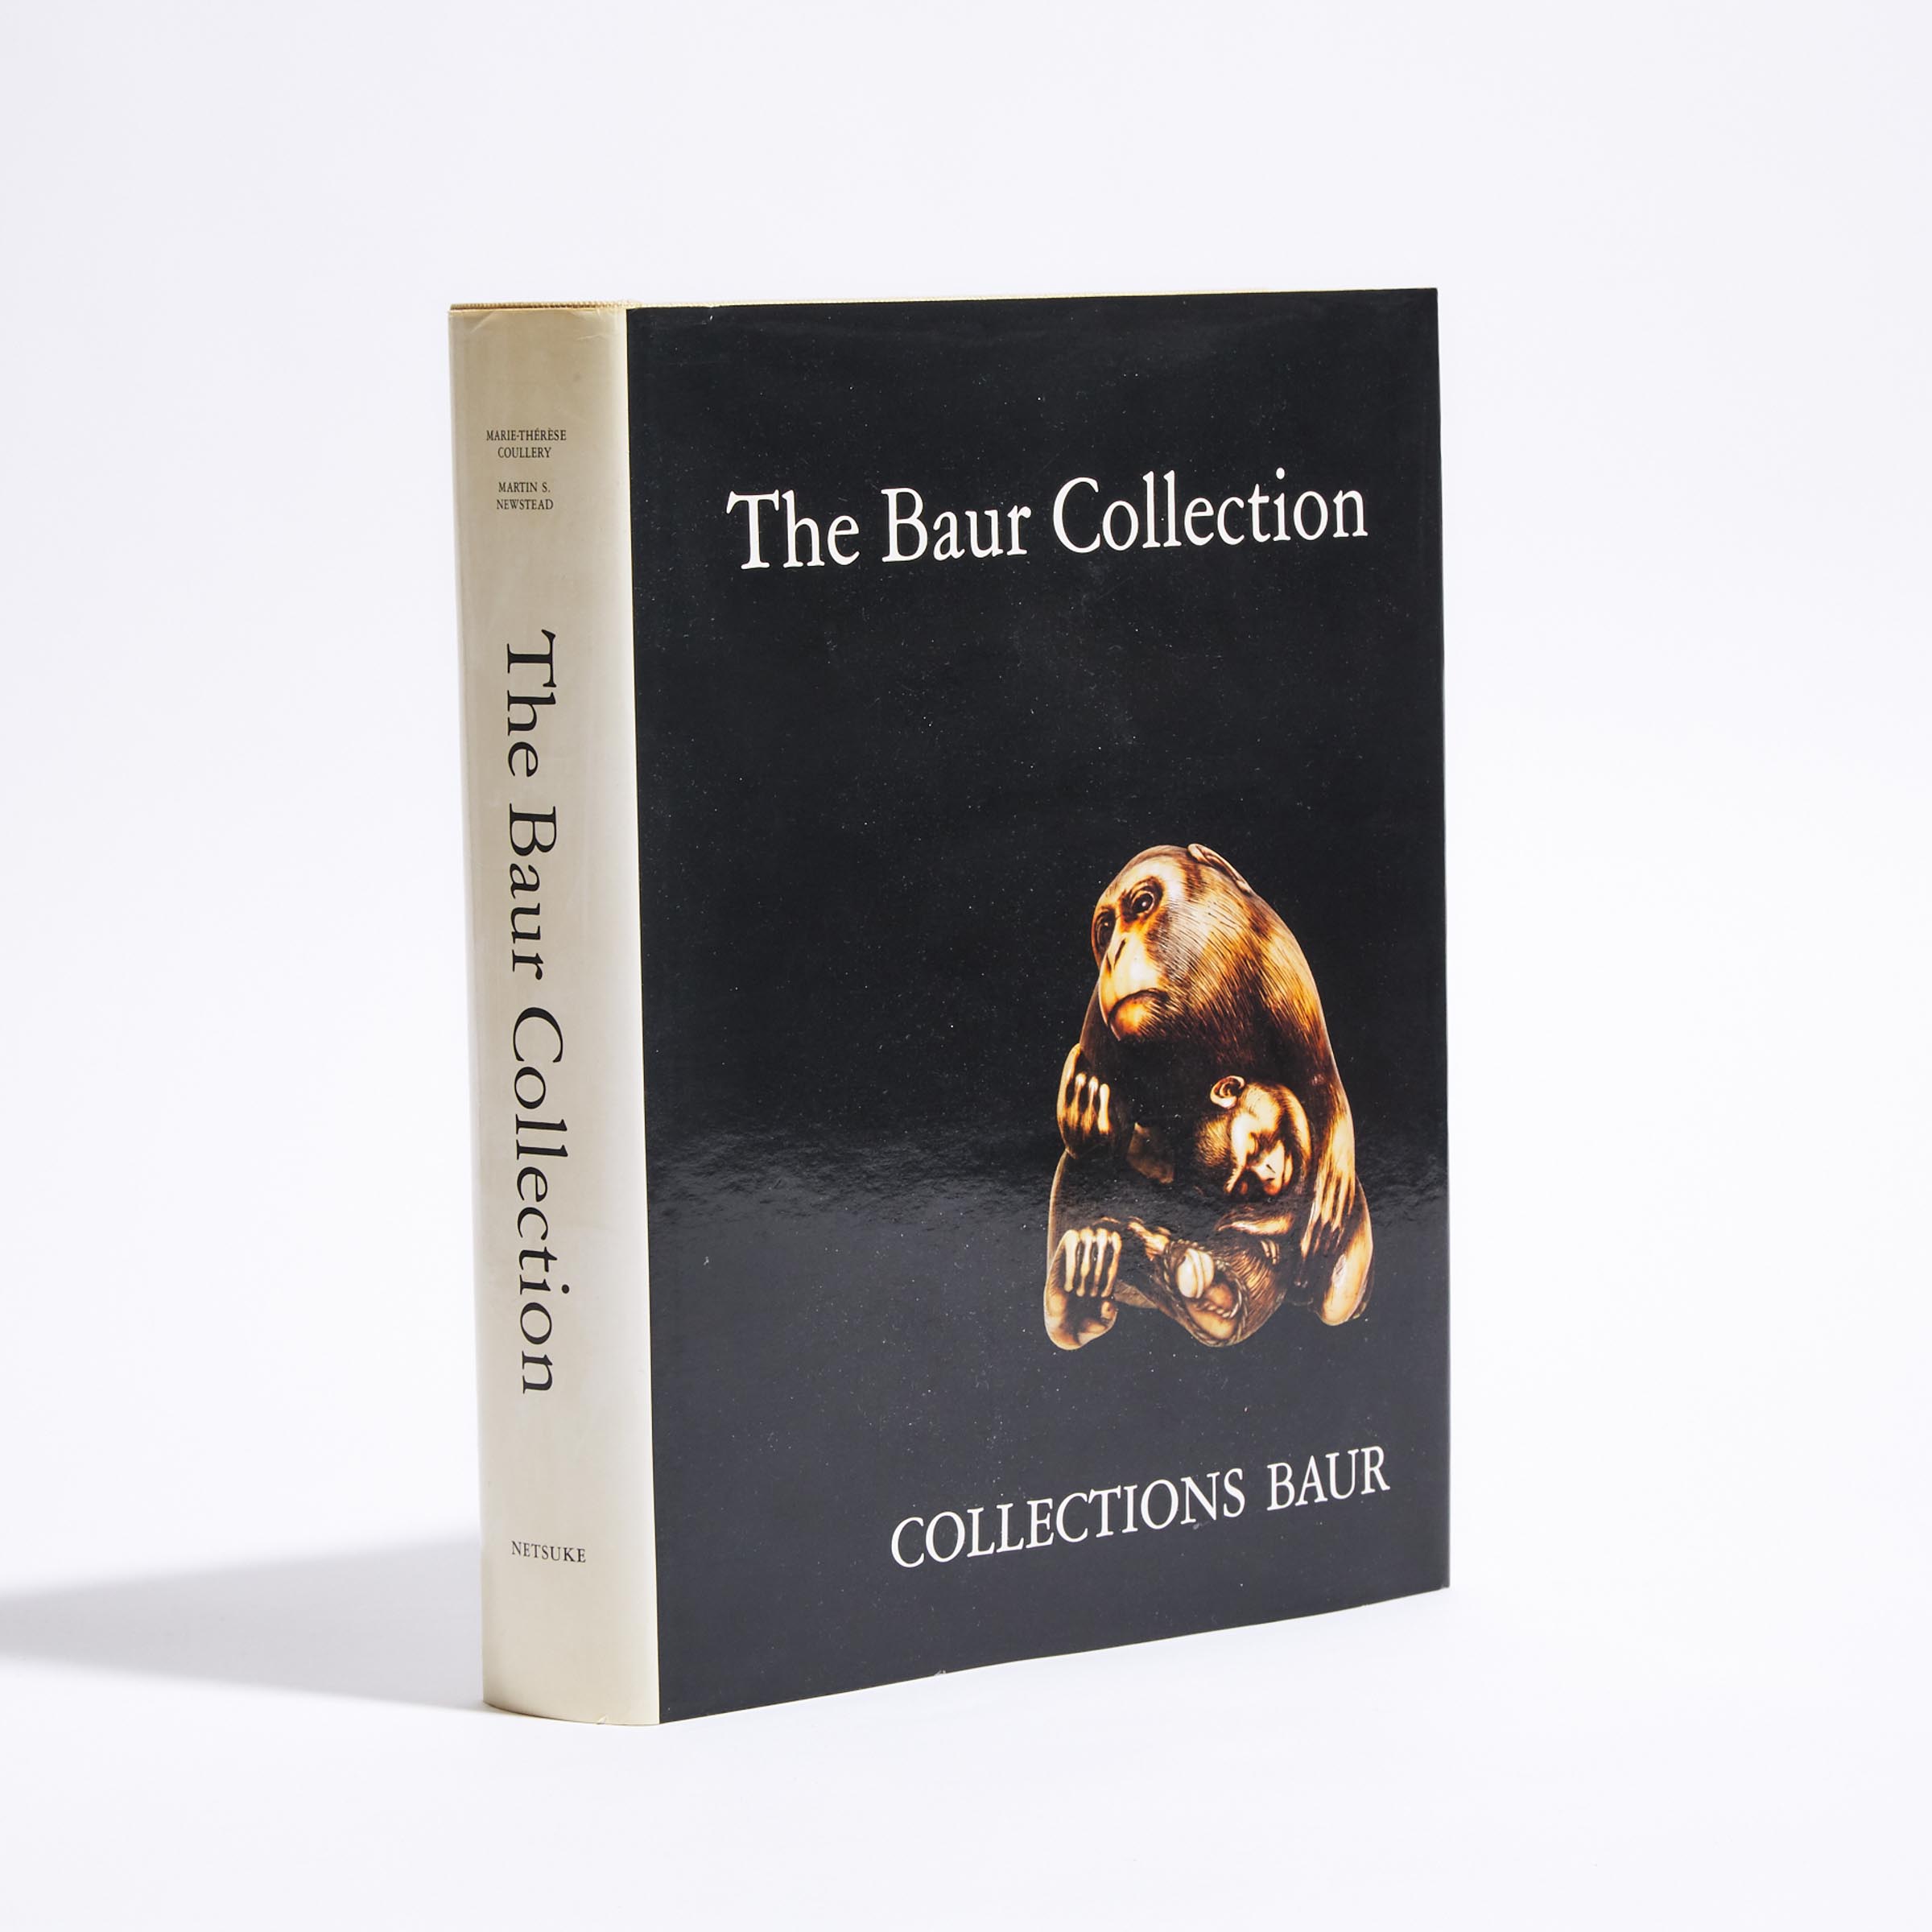 Marie-Thérèse Coullery and Martin S. Newstead, The Baur Collection of Netsuke, Genève, 1977